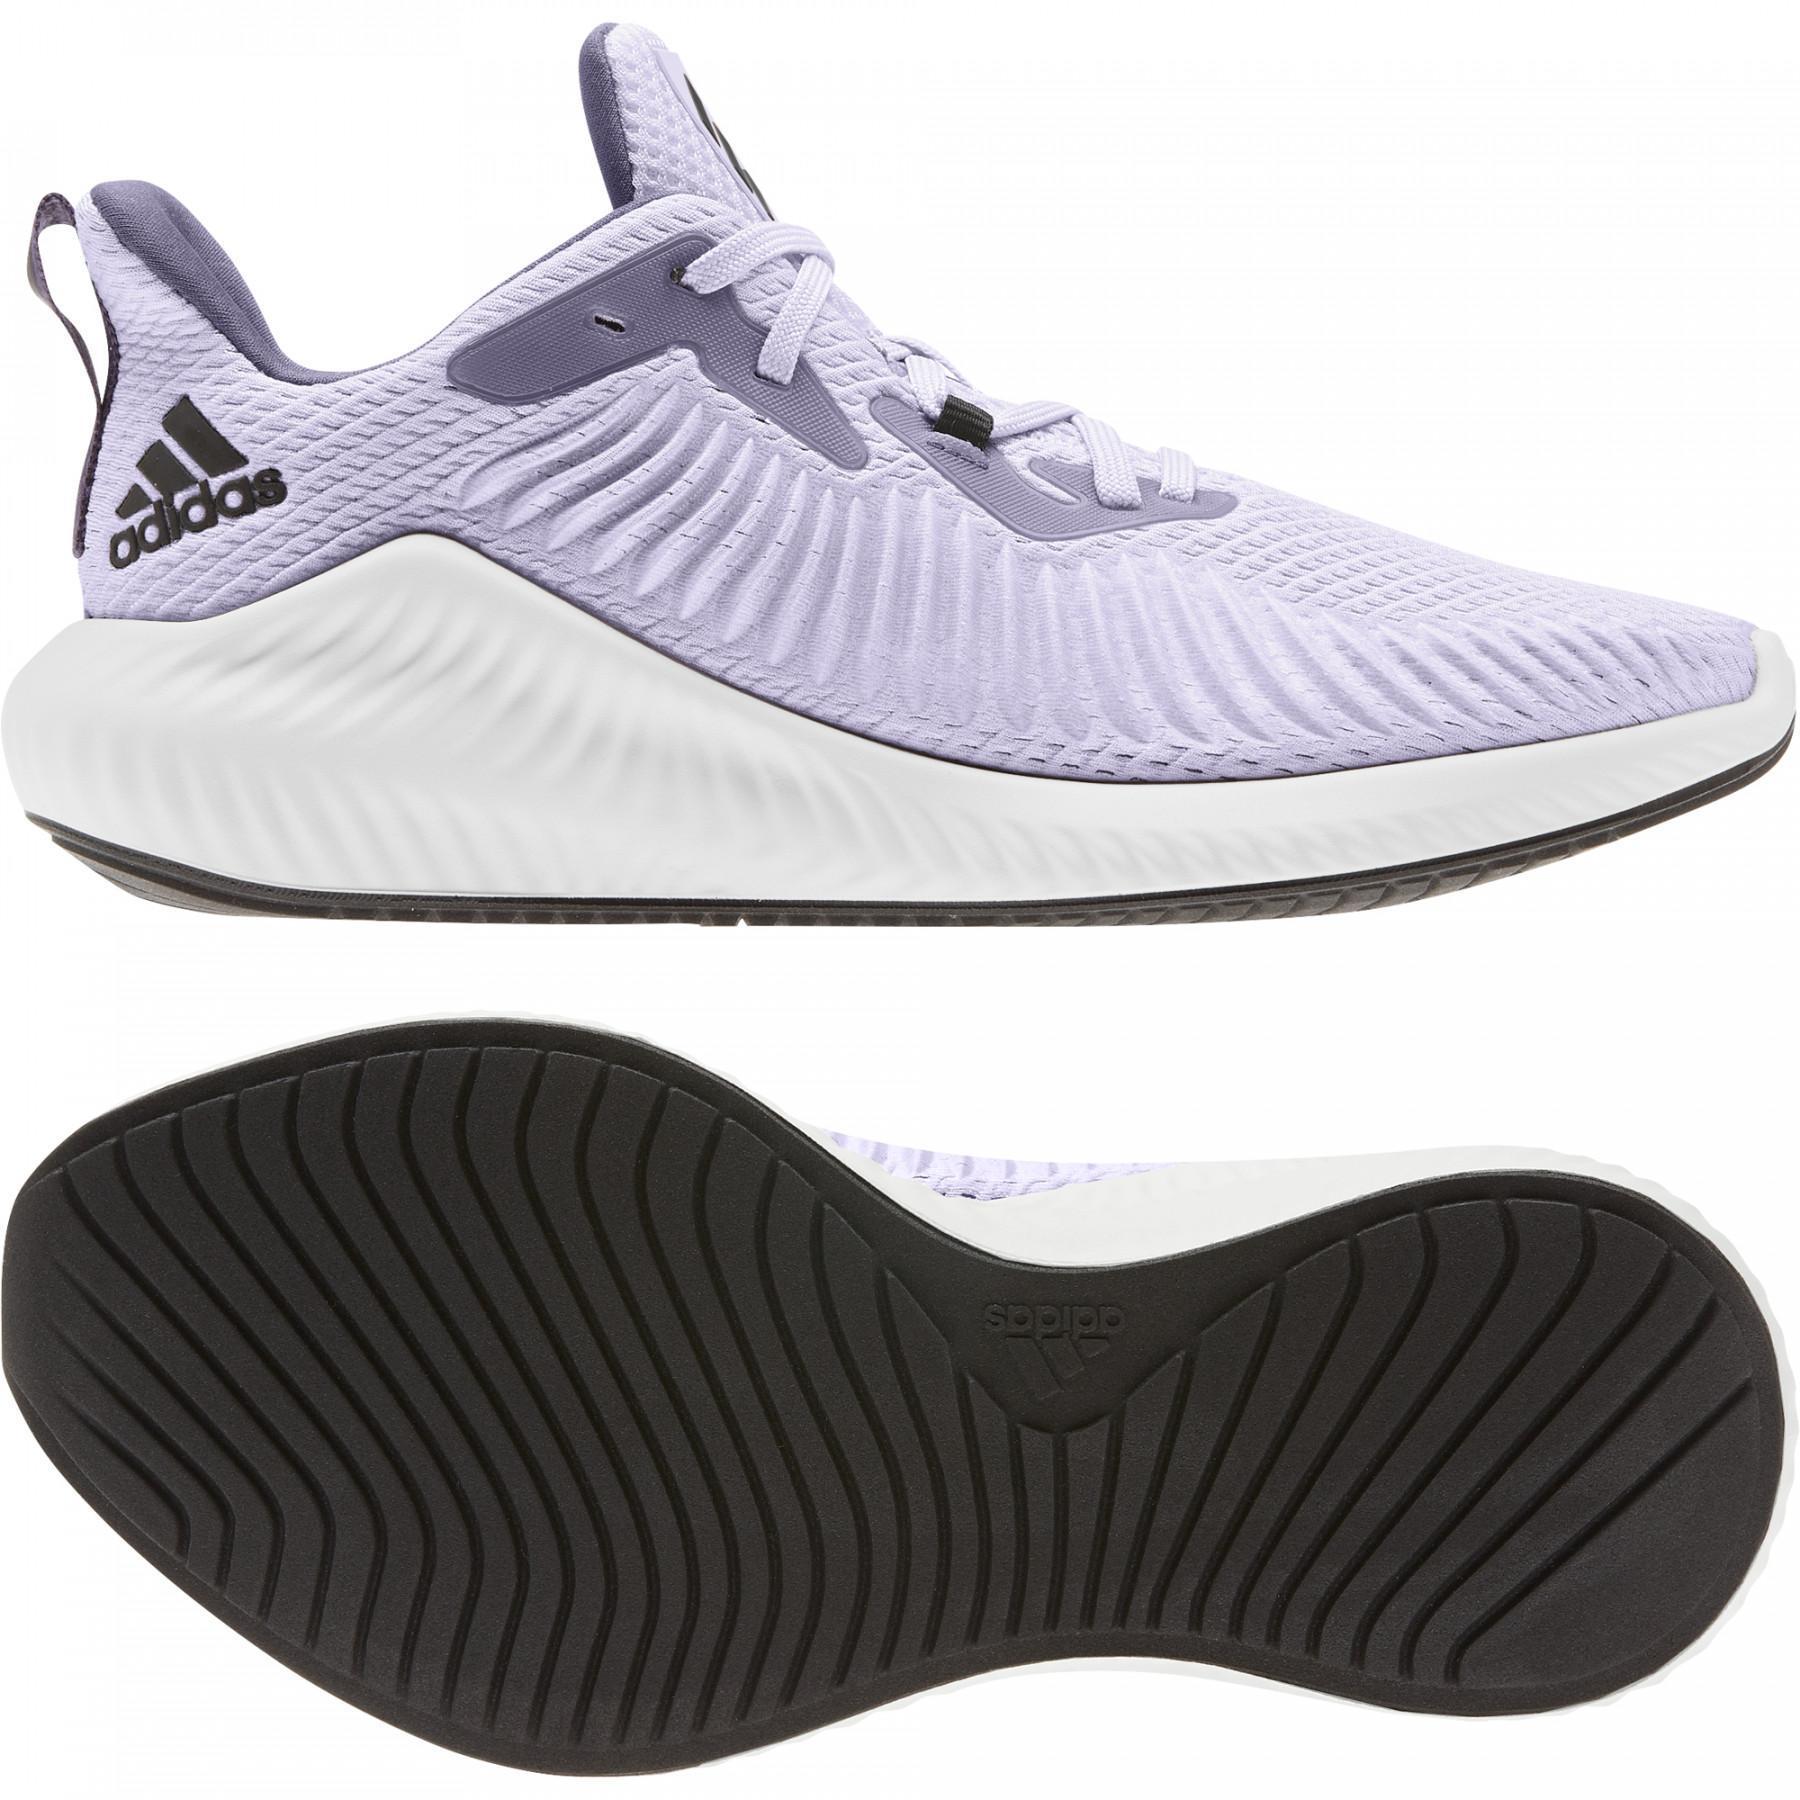 Women's sneakers adidas Alphabounce+